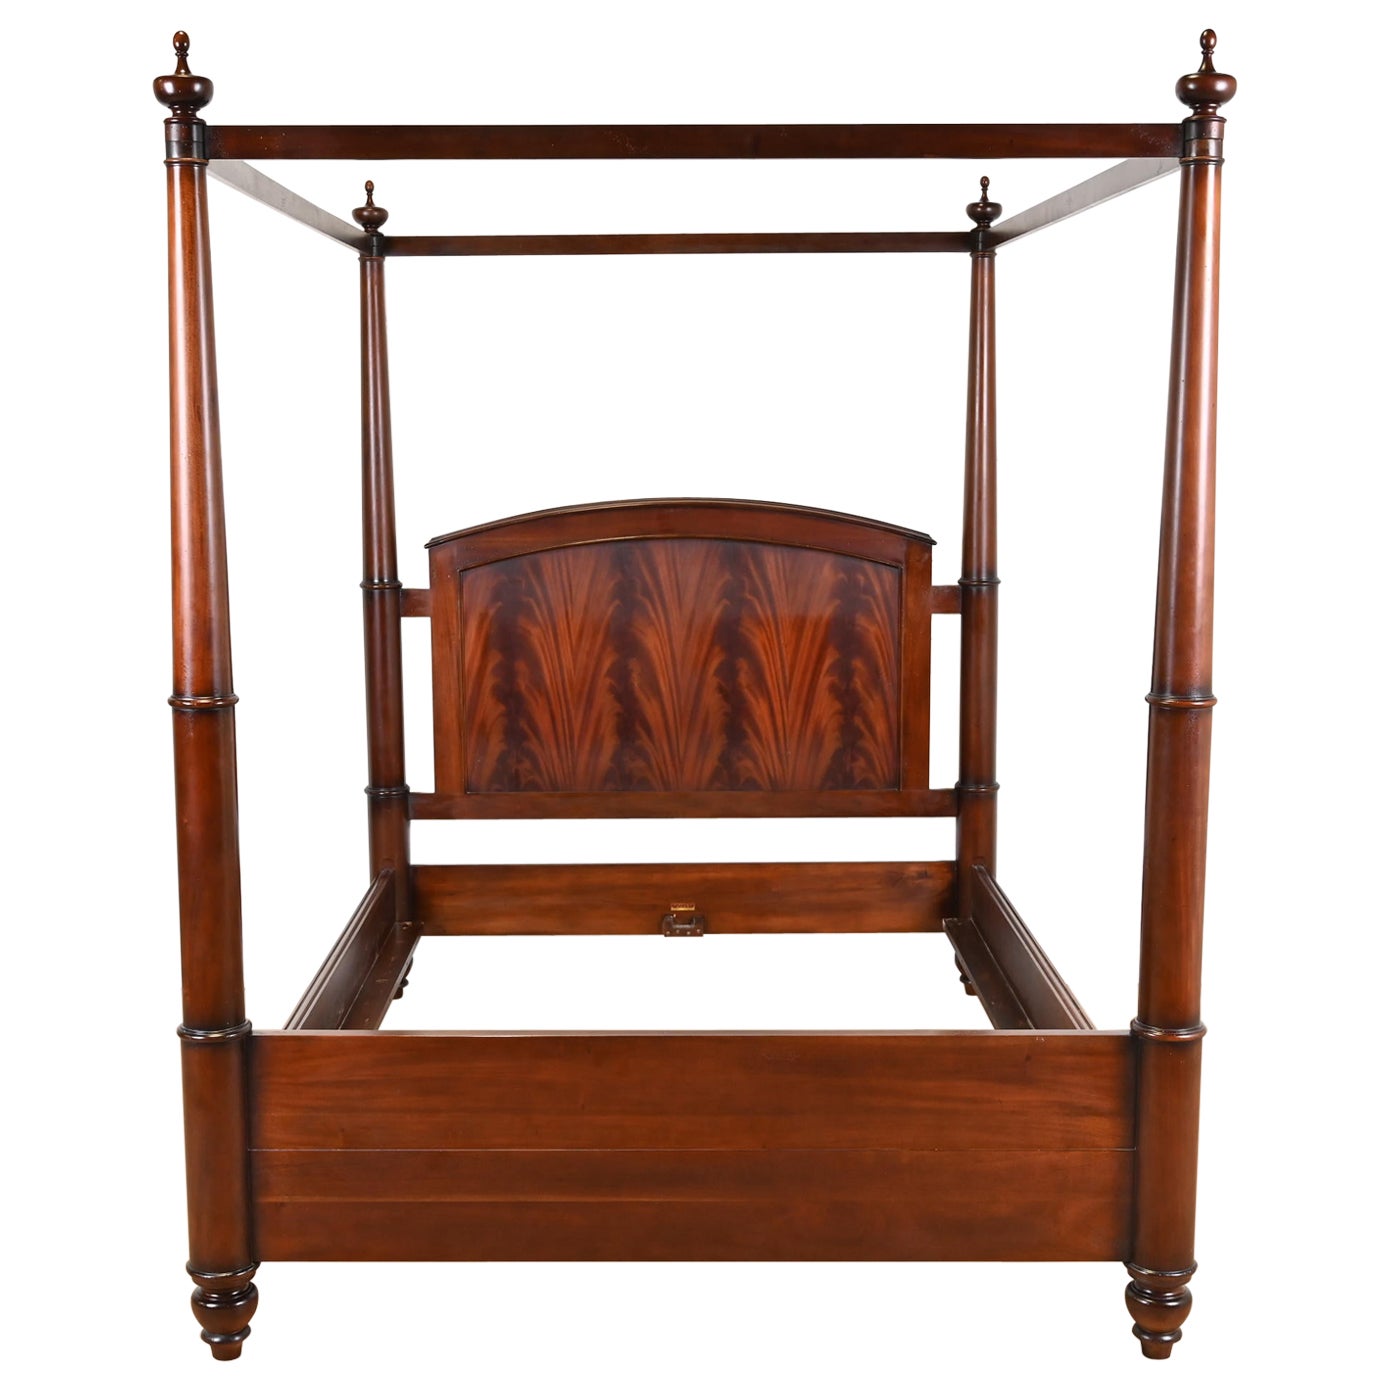 Baker Furniture Georgian Carved Flame Mahogany Four-Poster Queen Size Tester Bed